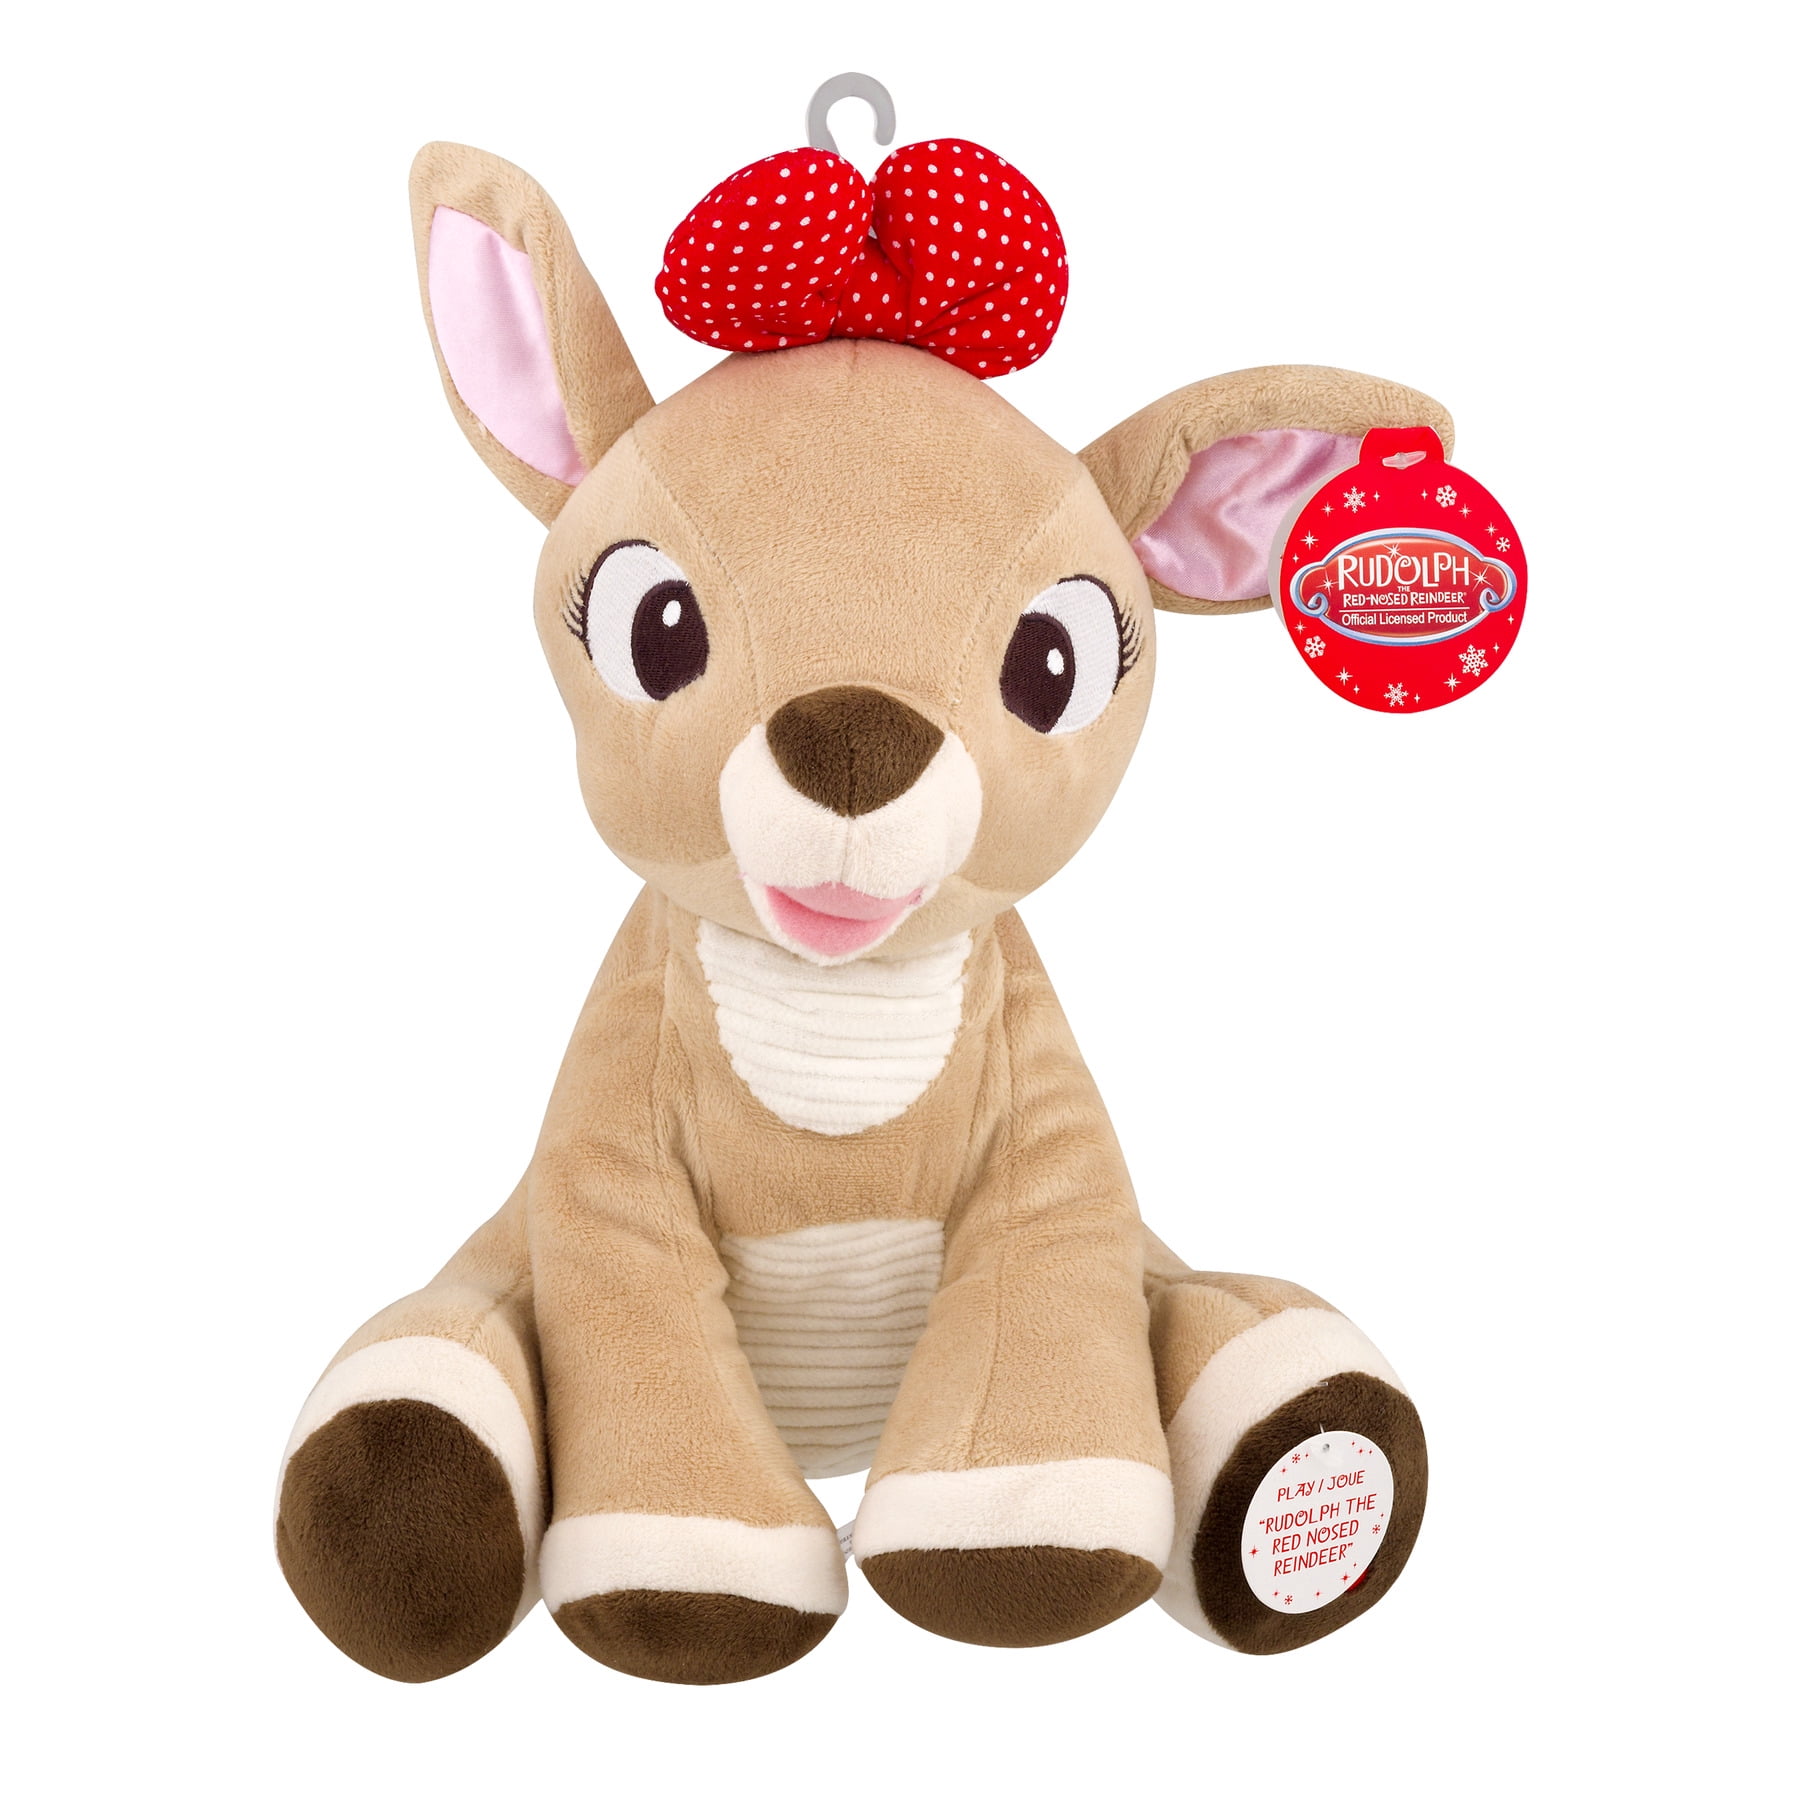 NEW RUDOLPH THE RED NOSED REINDEER 7.5"  PLUSH STUFFED ANIMAL 